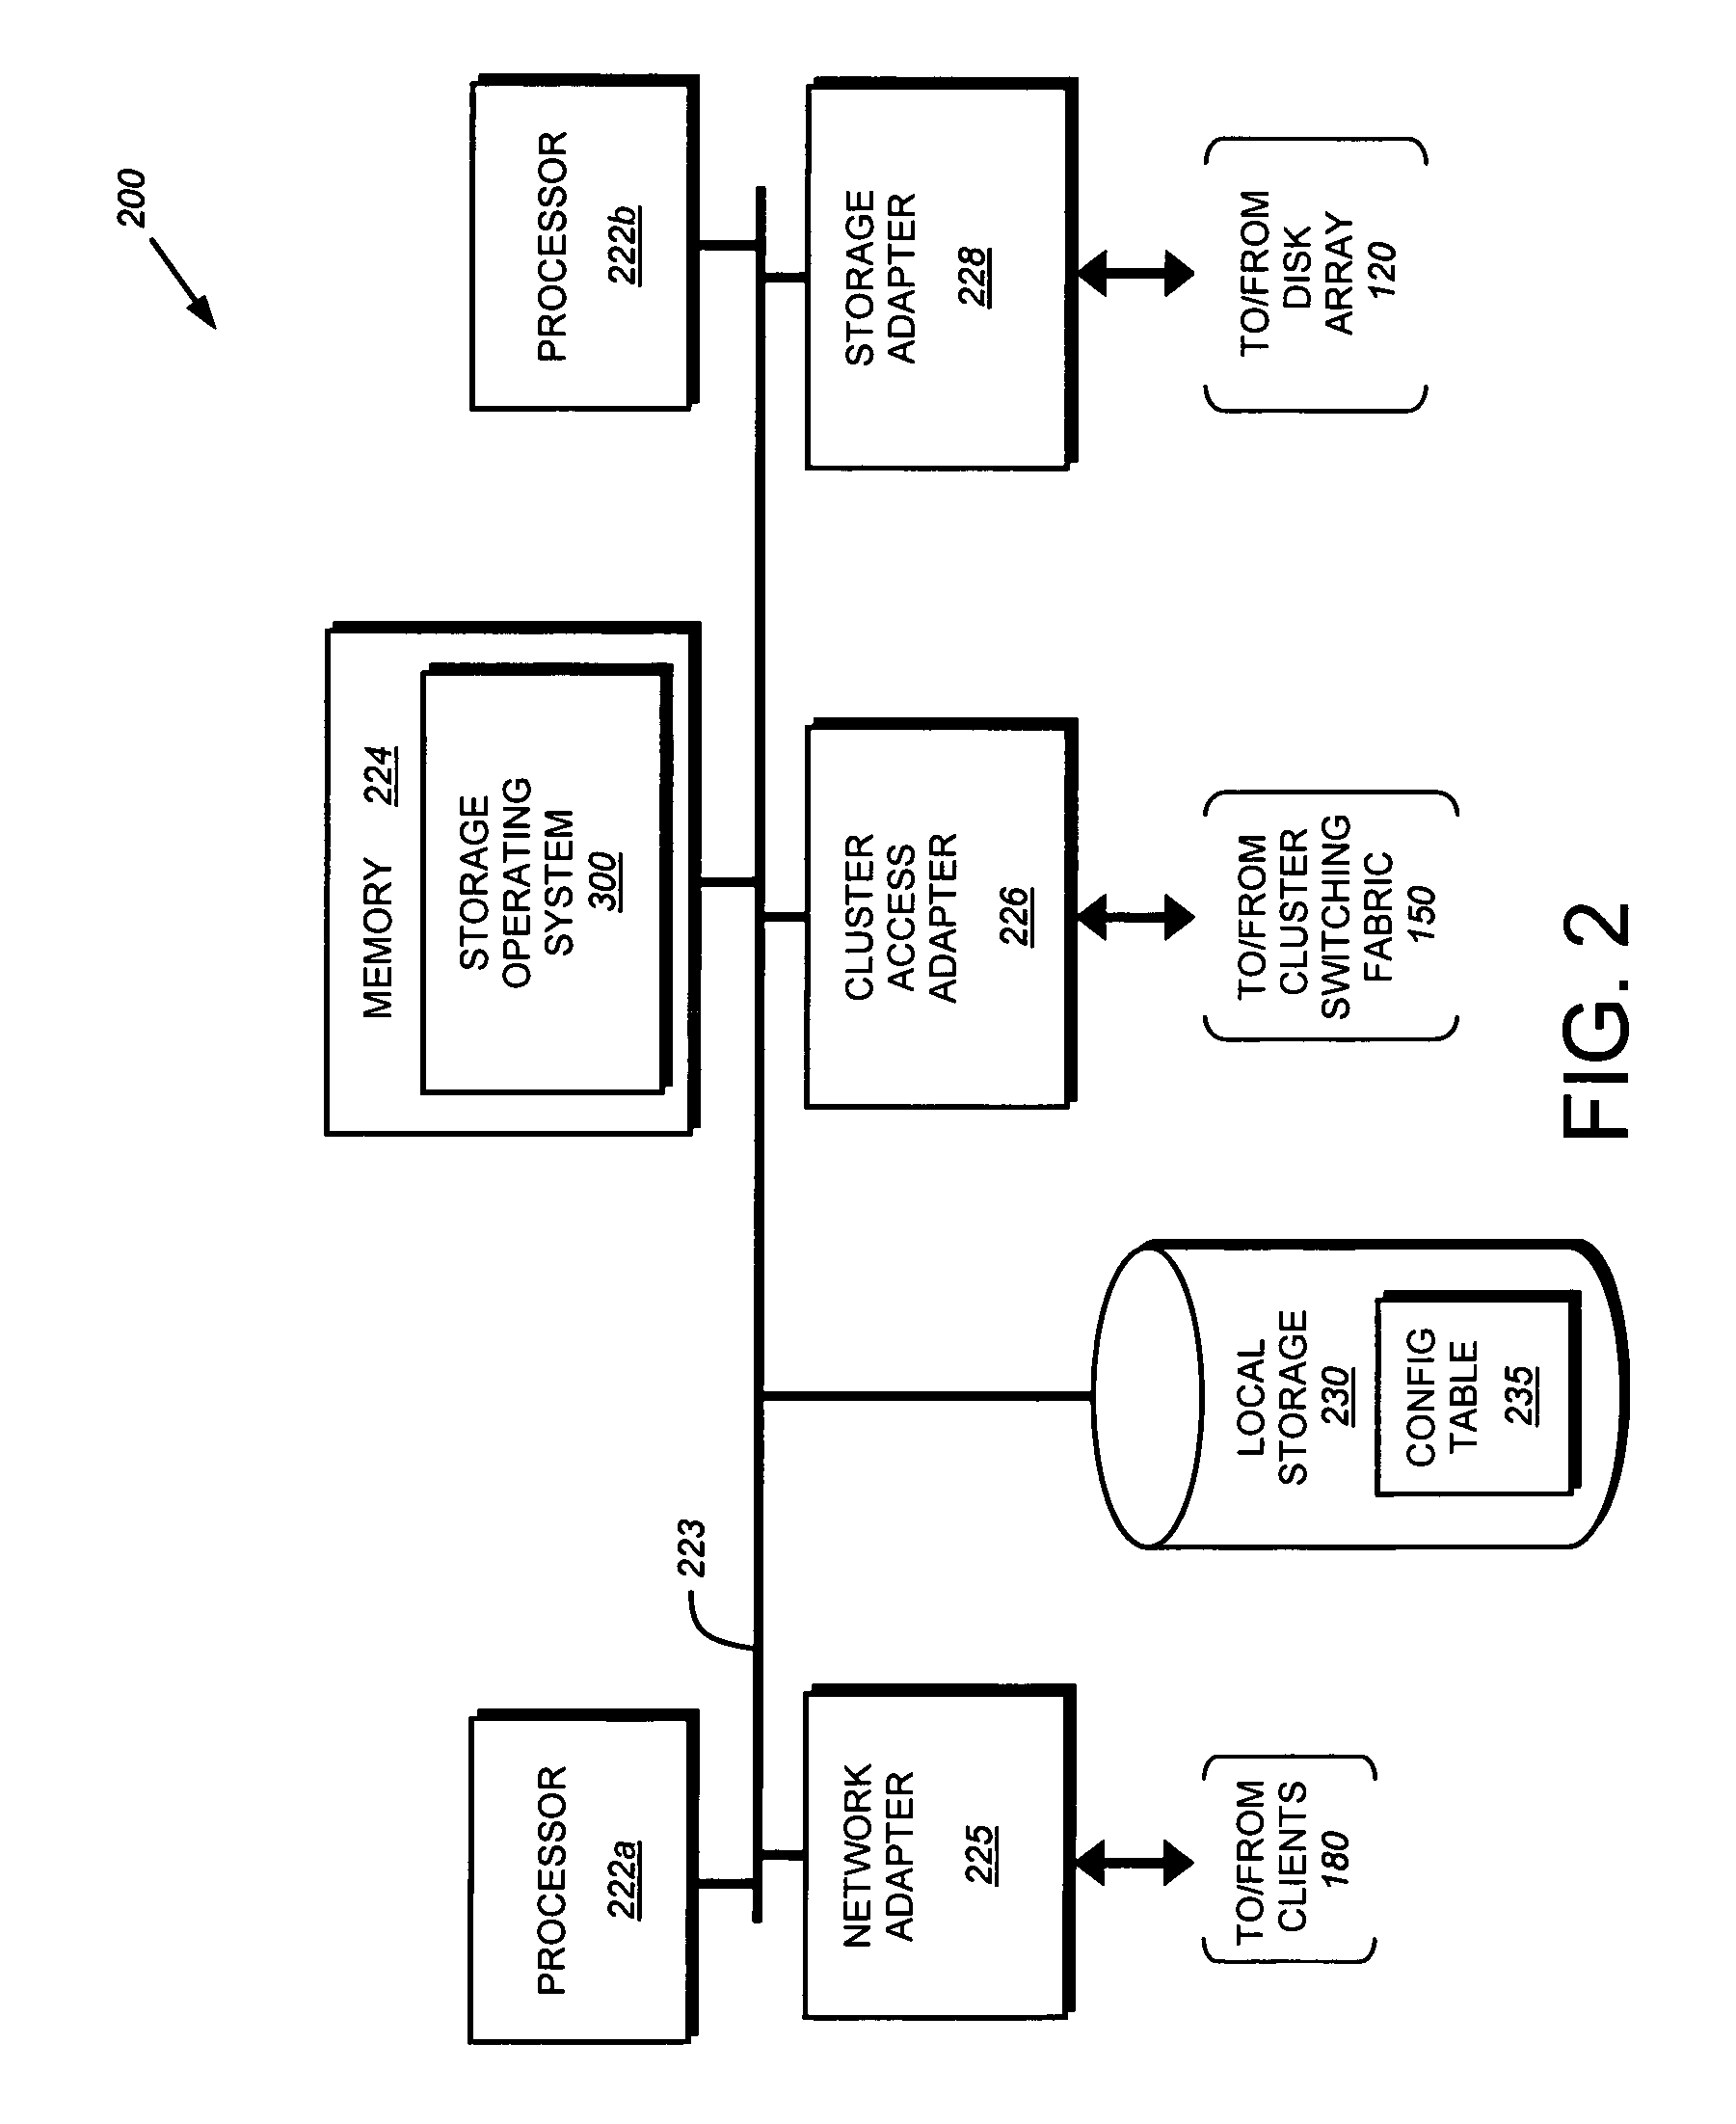 System and method for enabling de-duplication in a storage system architecture